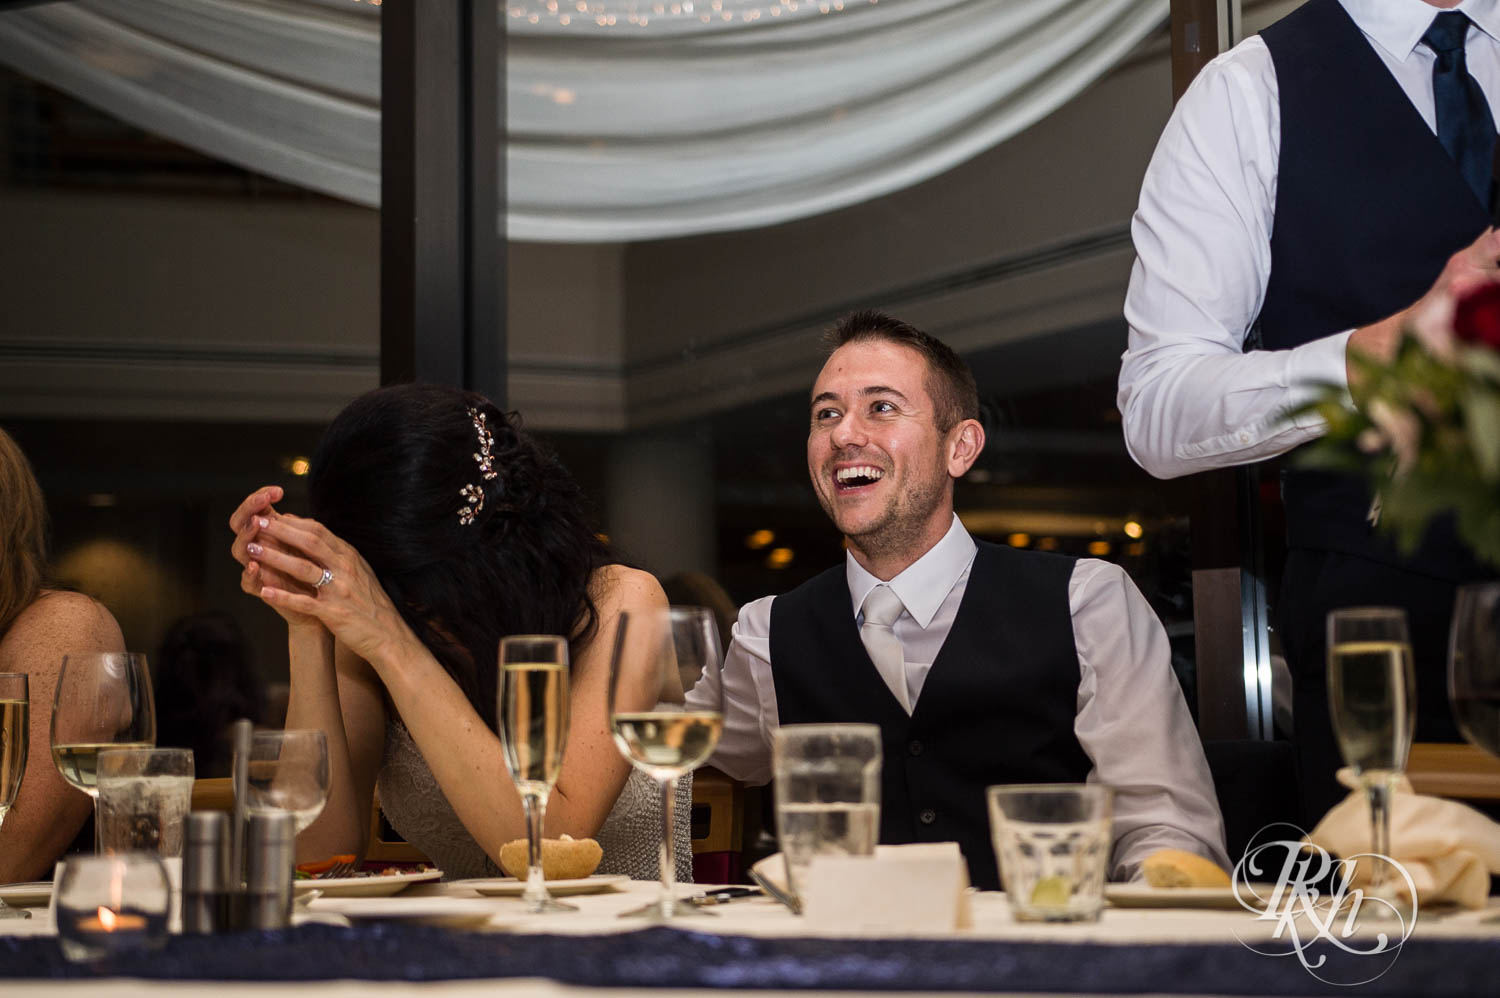 Bride and groom laugh during wedding reception in Chaska, Minnesota.